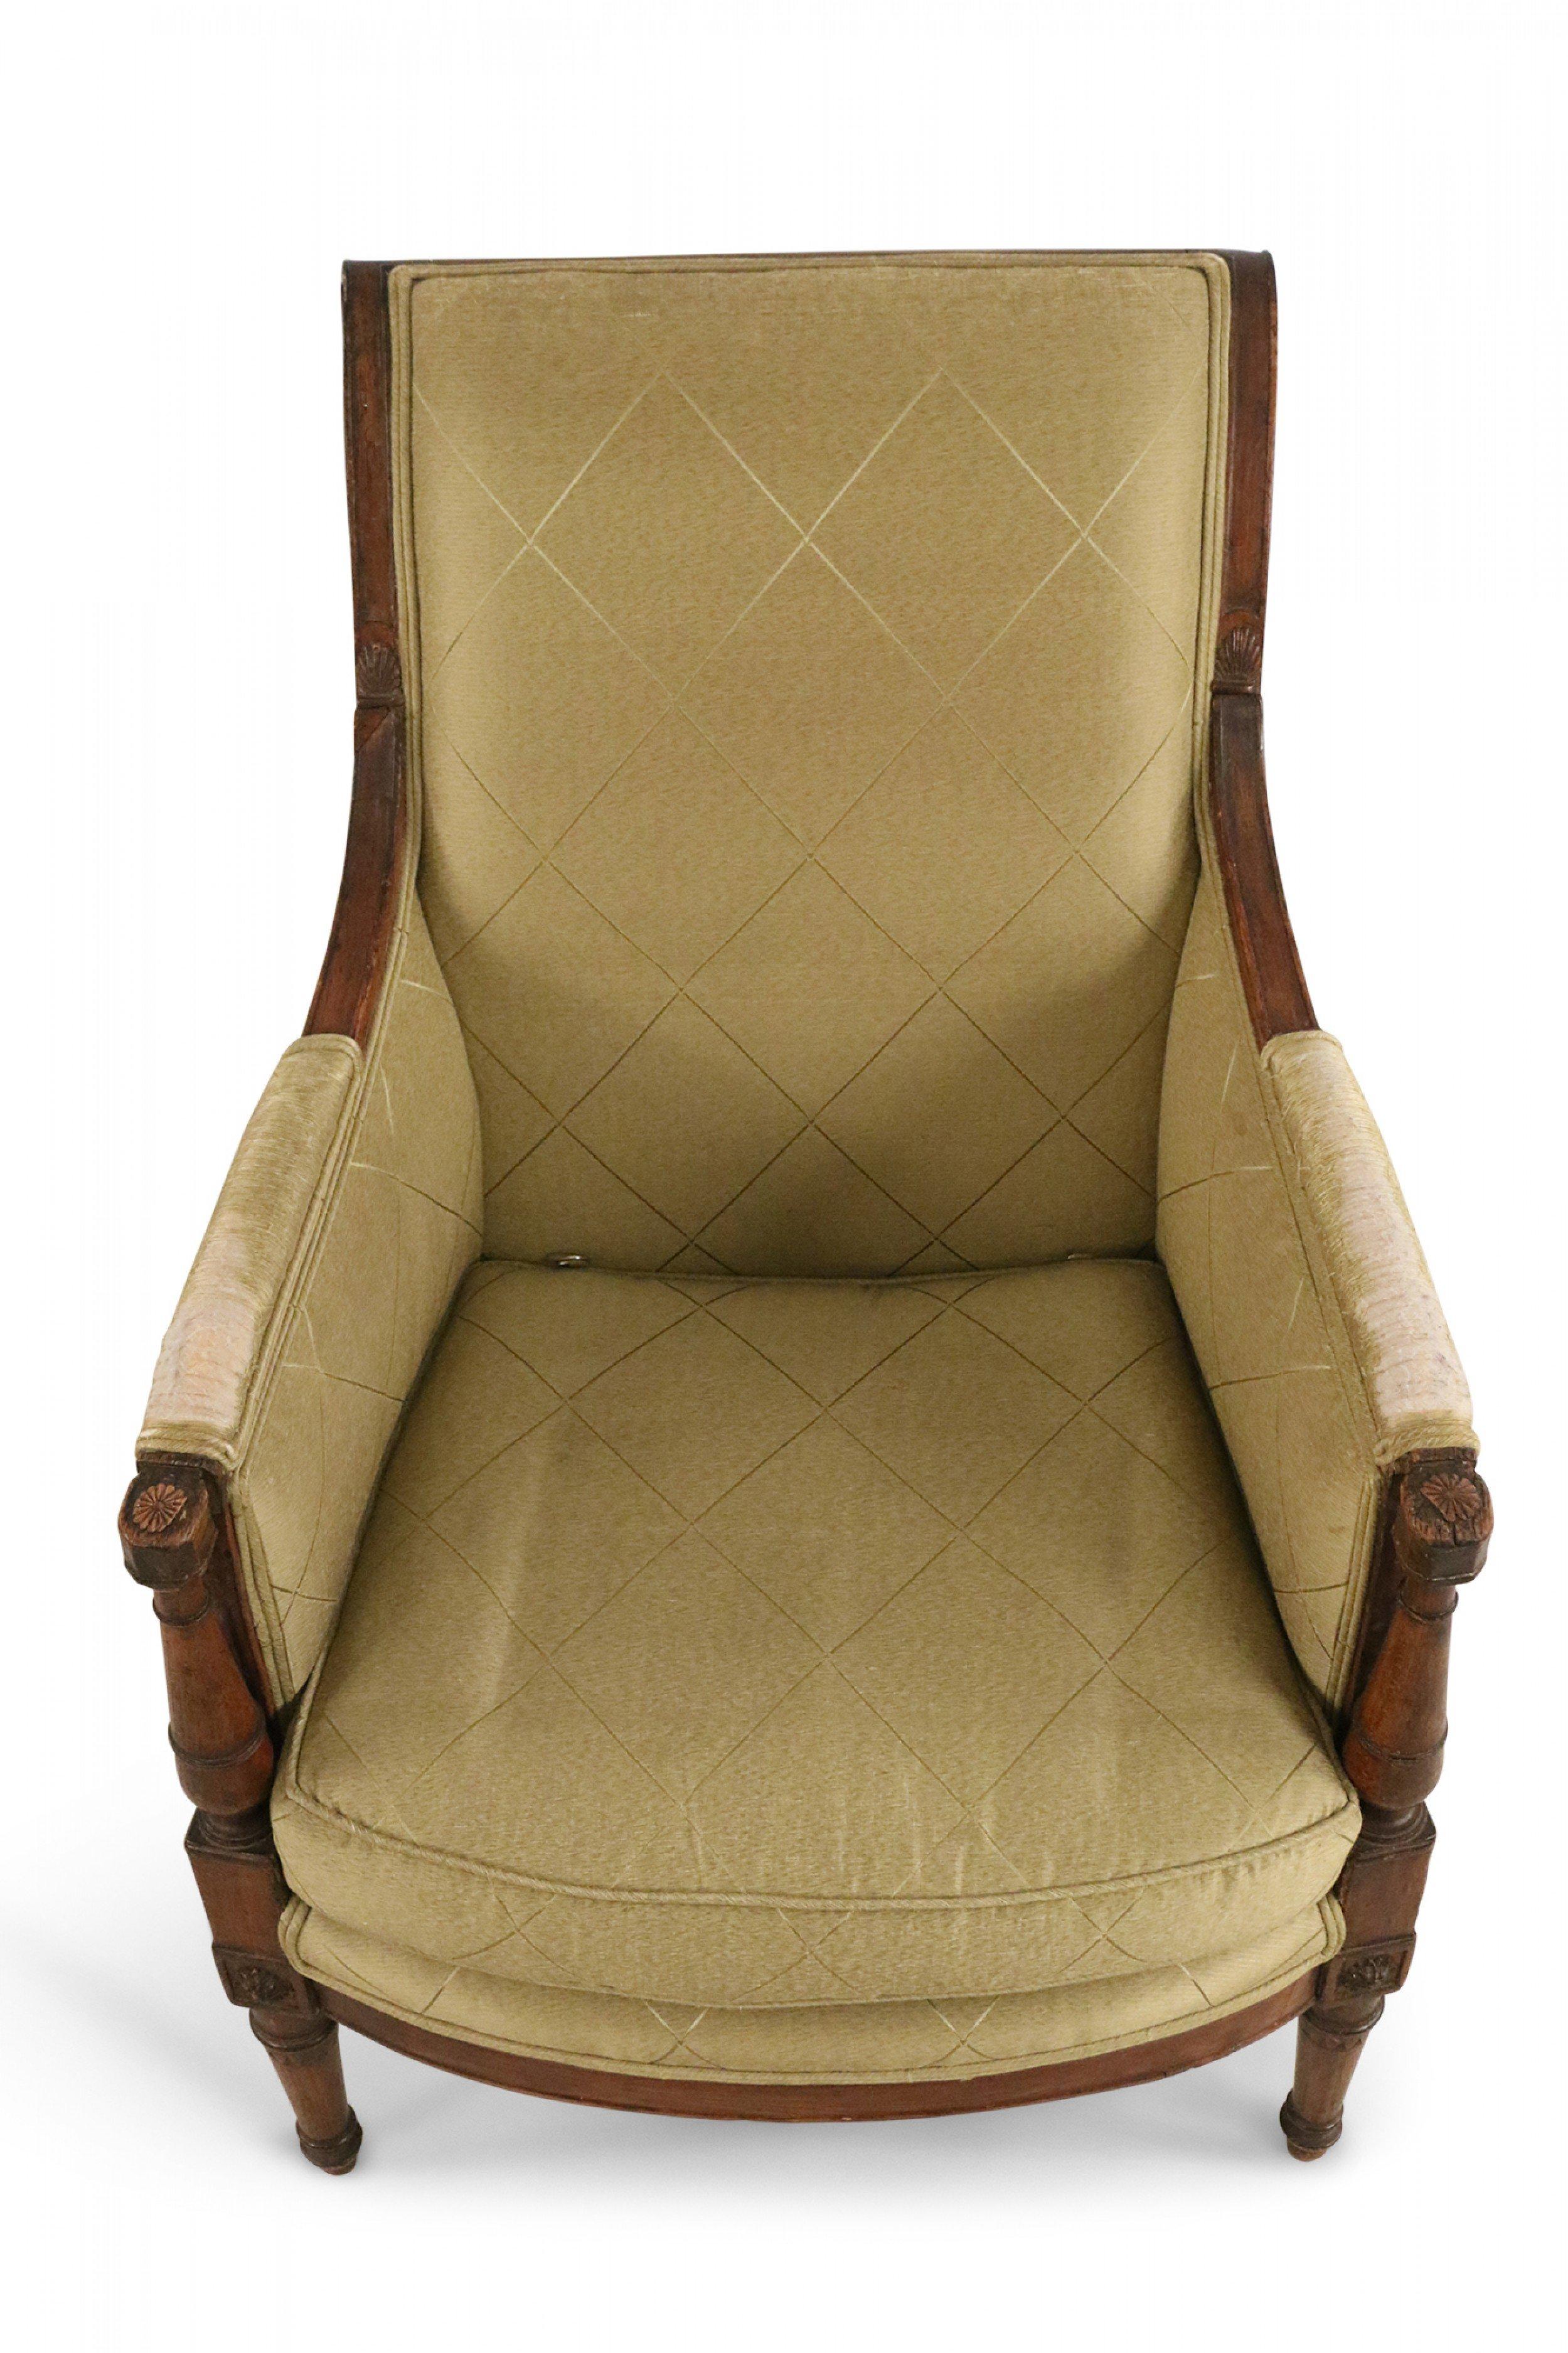 French Directoire Green Diamond Pattern Upholstered Mahogany Bergere Armchair In Good Condition For Sale In New York, NY